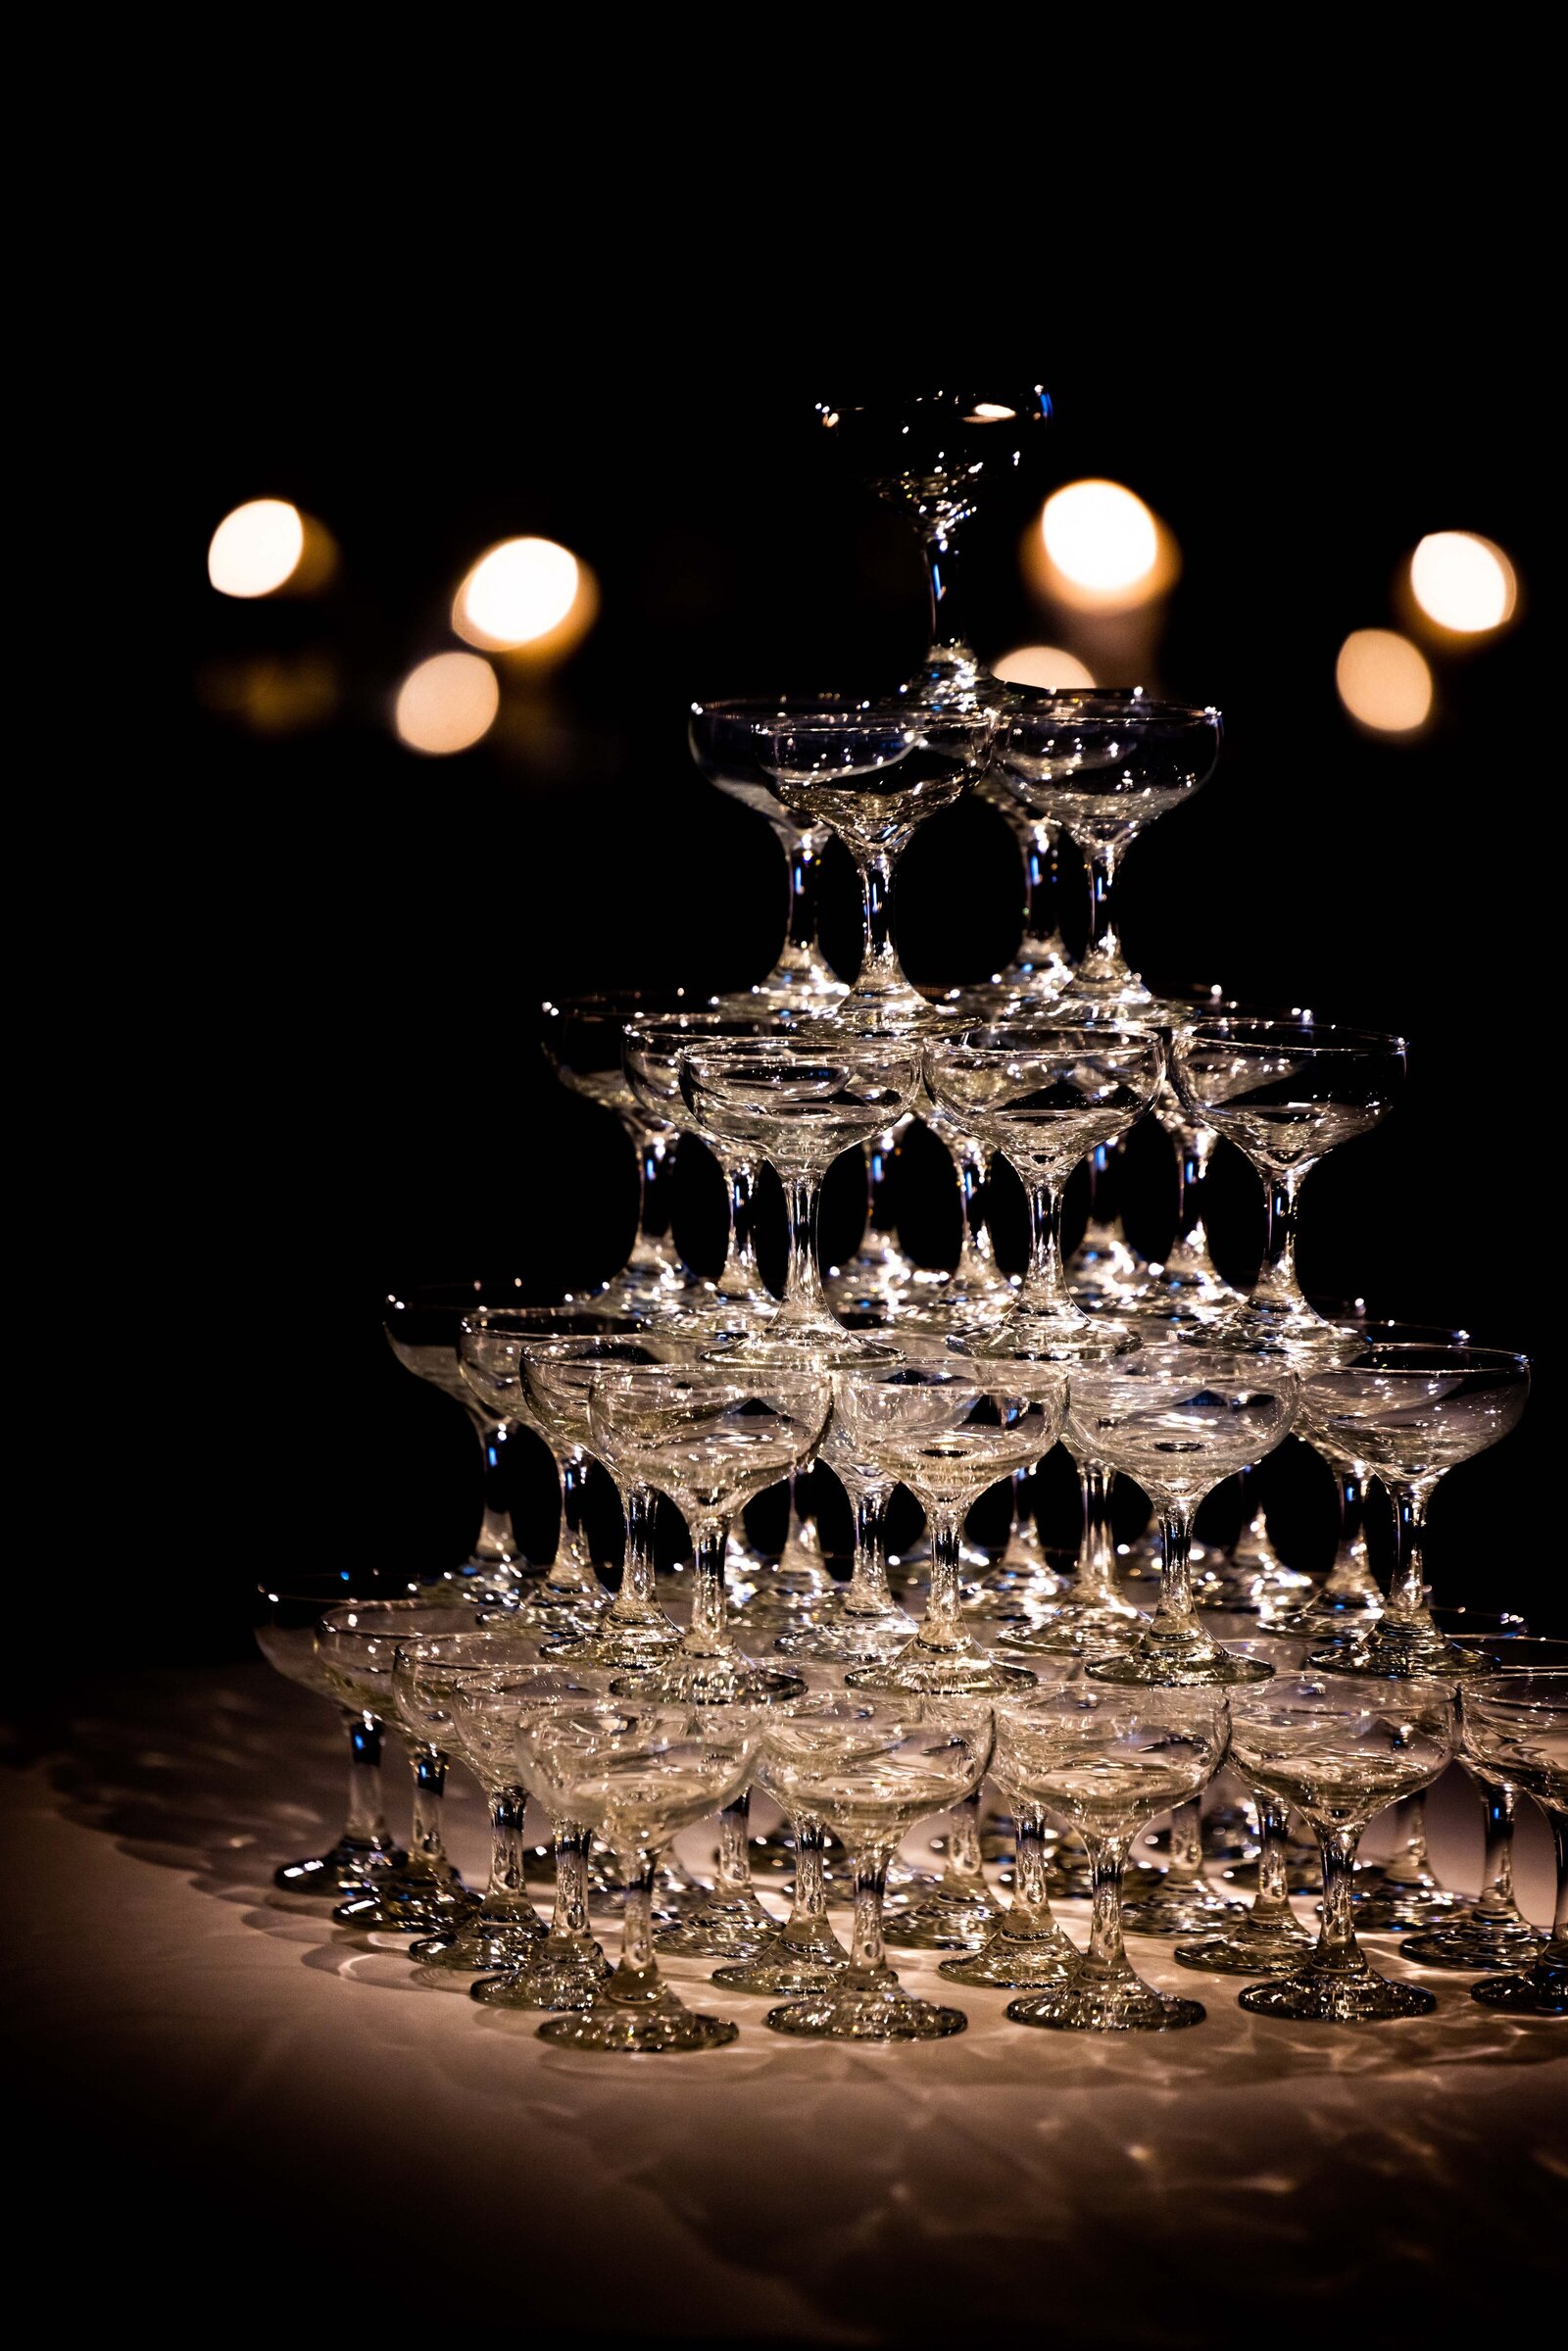 Step into a scene of dramatic elegance with this moody, backlit photograph of an extravagant champagne tower. The soft backlighting casts a mysterious glow, enhancing the allure and sophistication of the towering glasses filled with bubbling champagne. This captivating image is perfect for those seeking to add a touch of opulence and theatrical flair to their event, offering a visually stunning centerpiece that embodies celebration and luxury.